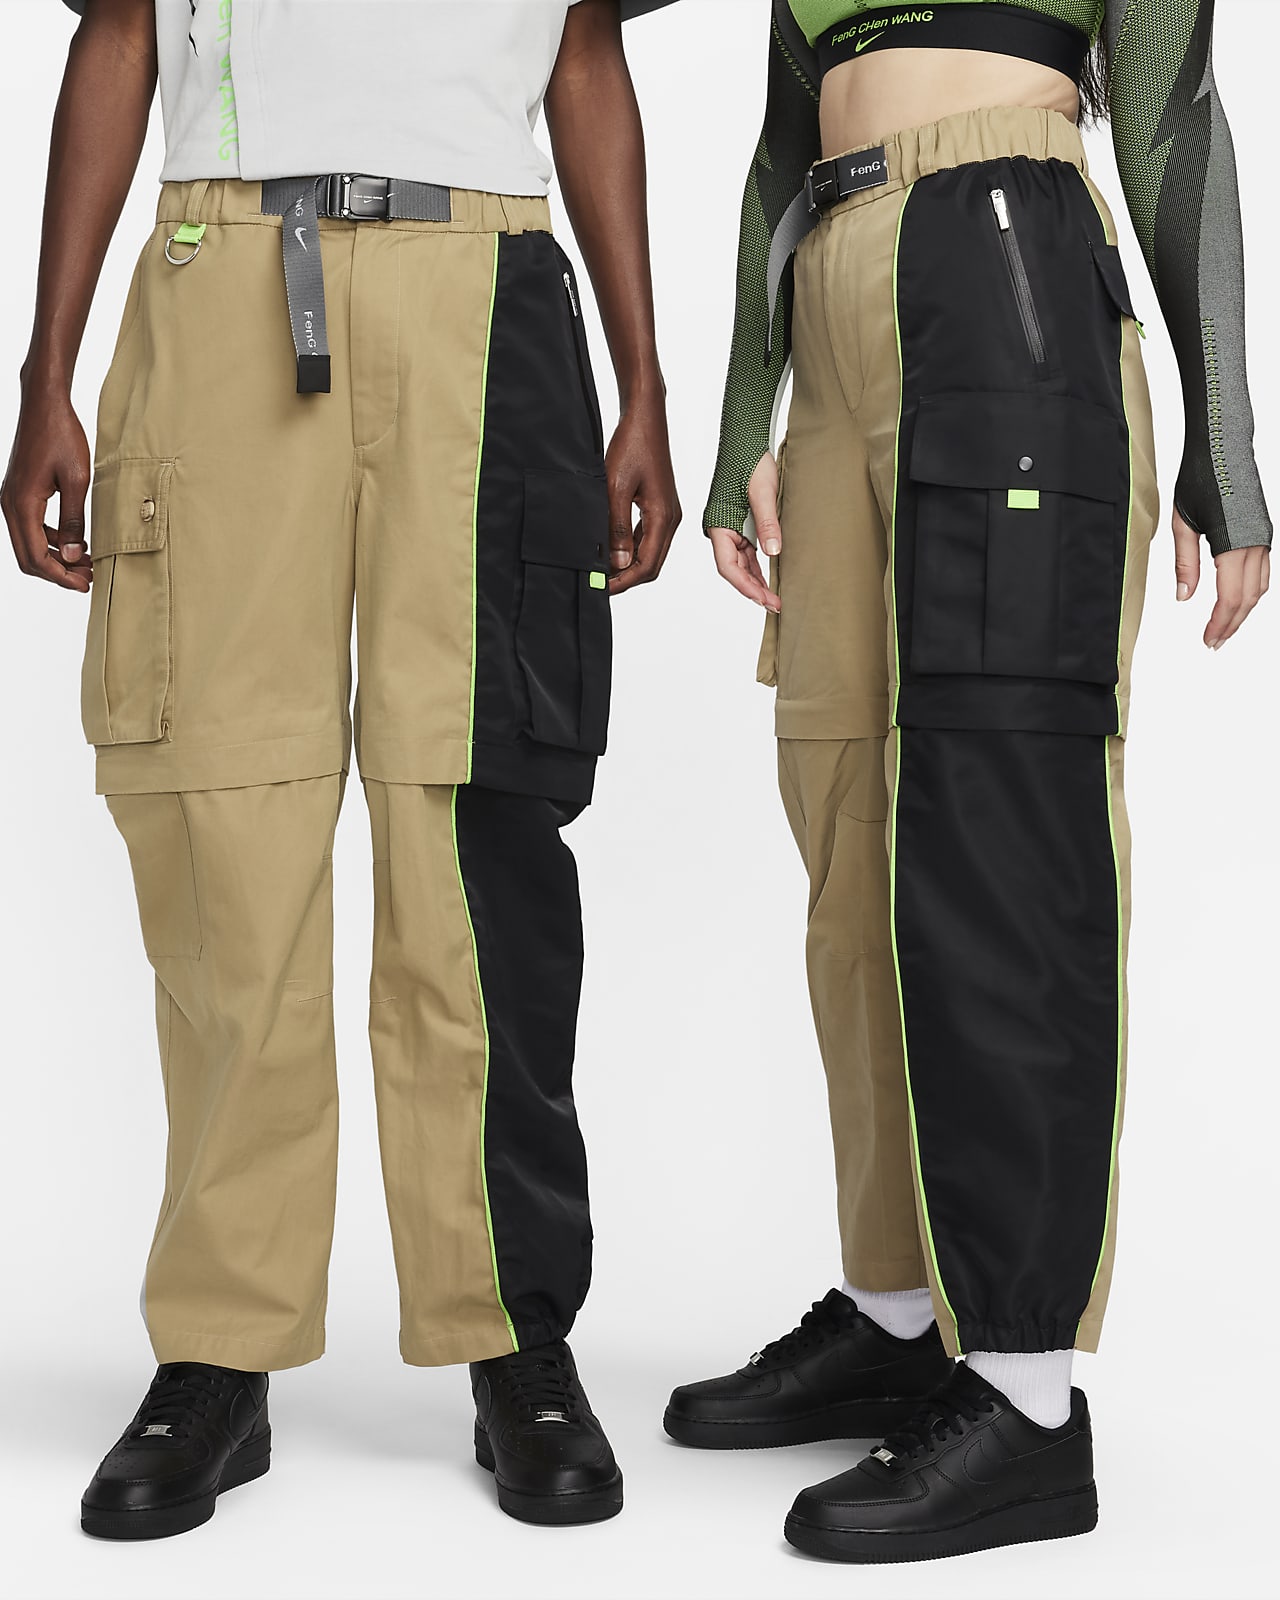 https://static.nike.com/a/images/t_PDP_1280_v1/f_auto,q_auto:eco/c63ff3a4-ac3c-4b00-9542-6a0a185afcce/feng-chen-wang-cargo-pants-s2zgvT.png